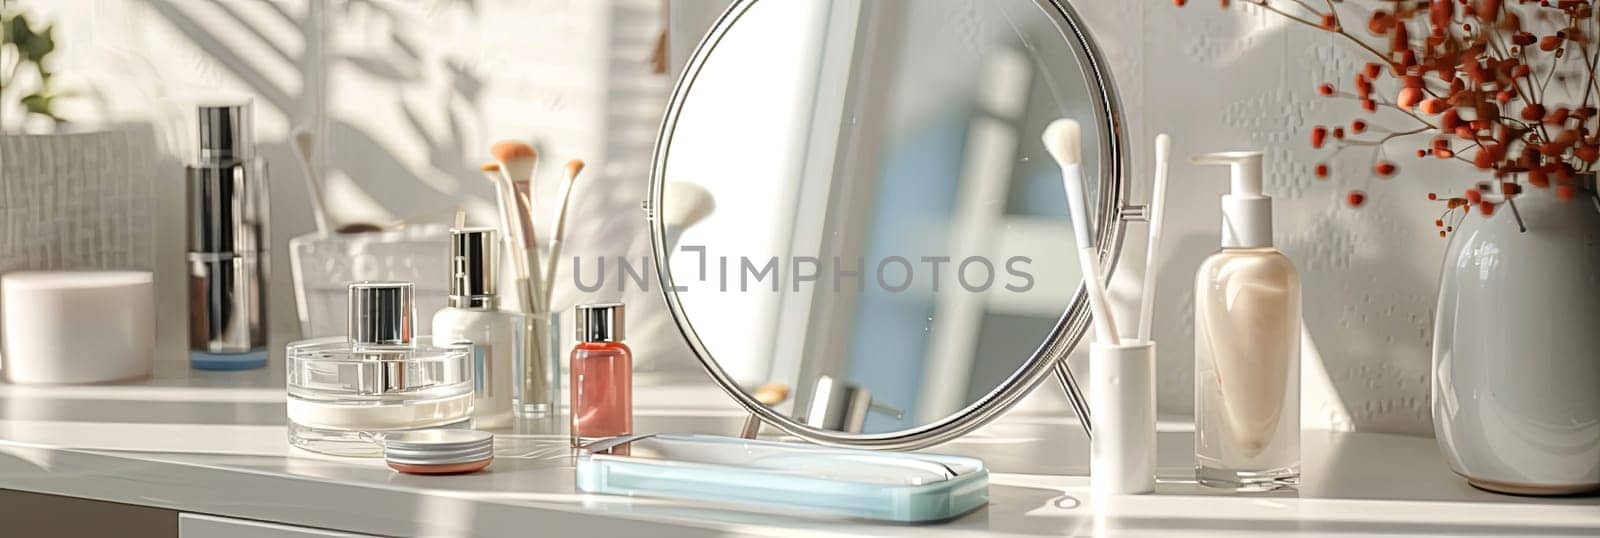 A tabletop mirror is surrounded by various cosmetic products in a bright and inviting bathroom setting.